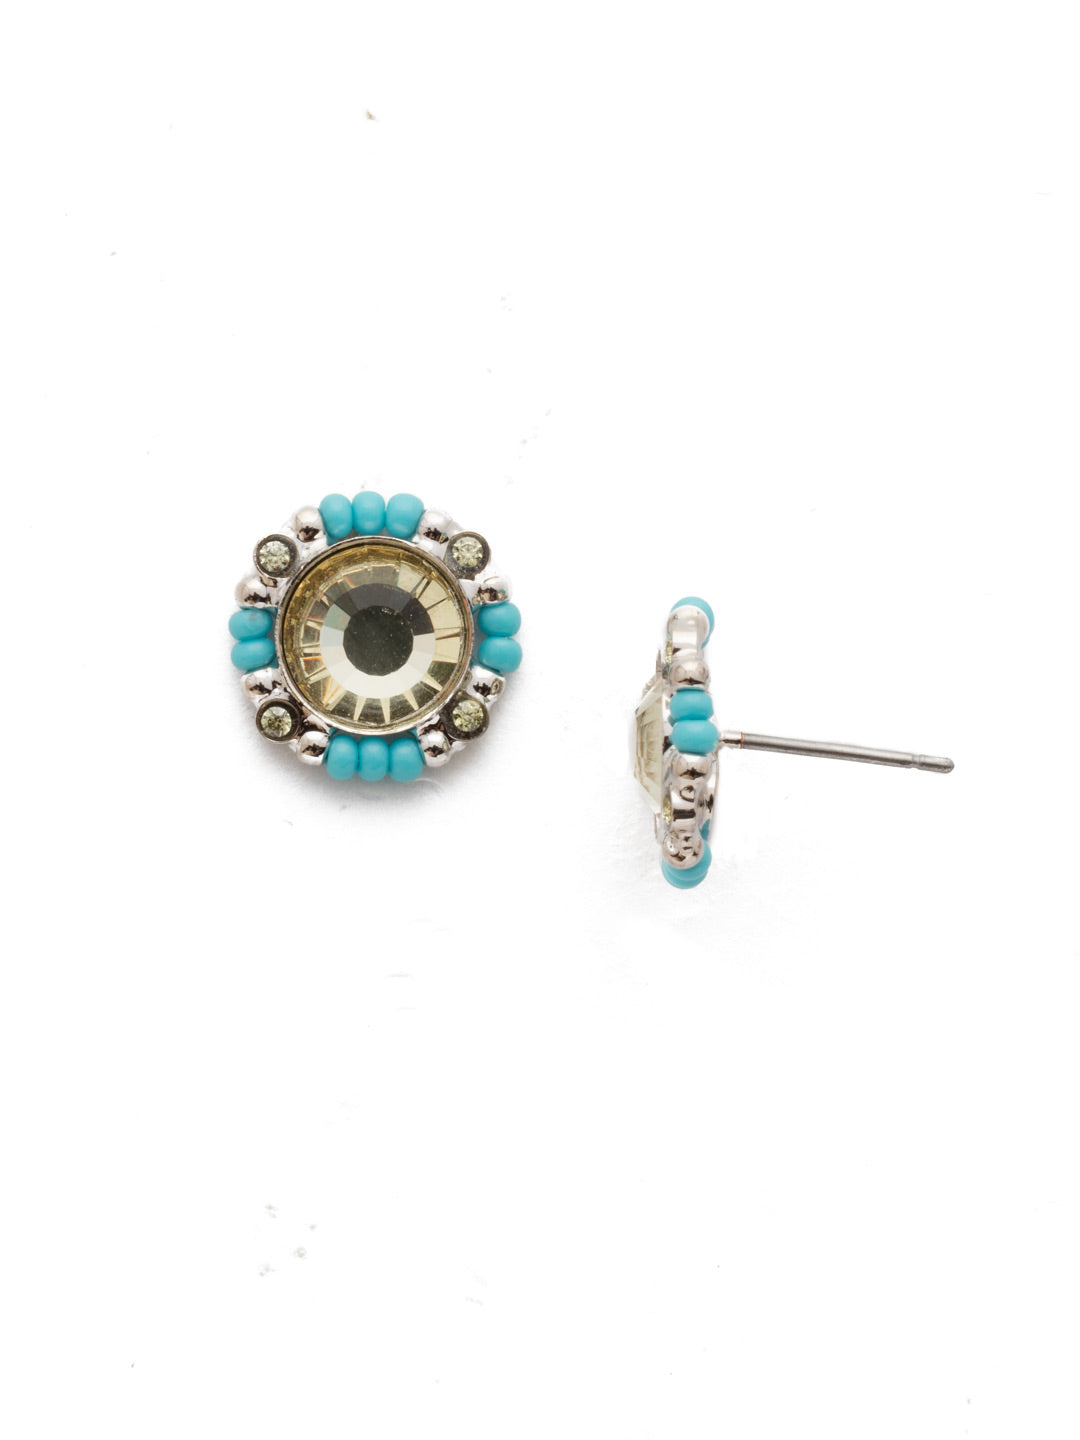 Ebe Post Earrings - EEH9RHTHT - <p>Classic crystal studs get a stylish upgrade with a bit of handcrafted beadwork...perfect for pairing with absolutely any outfit. From Sorrelli's Tahitian Treat collection in our Palladium Silver-tone finish.</p>